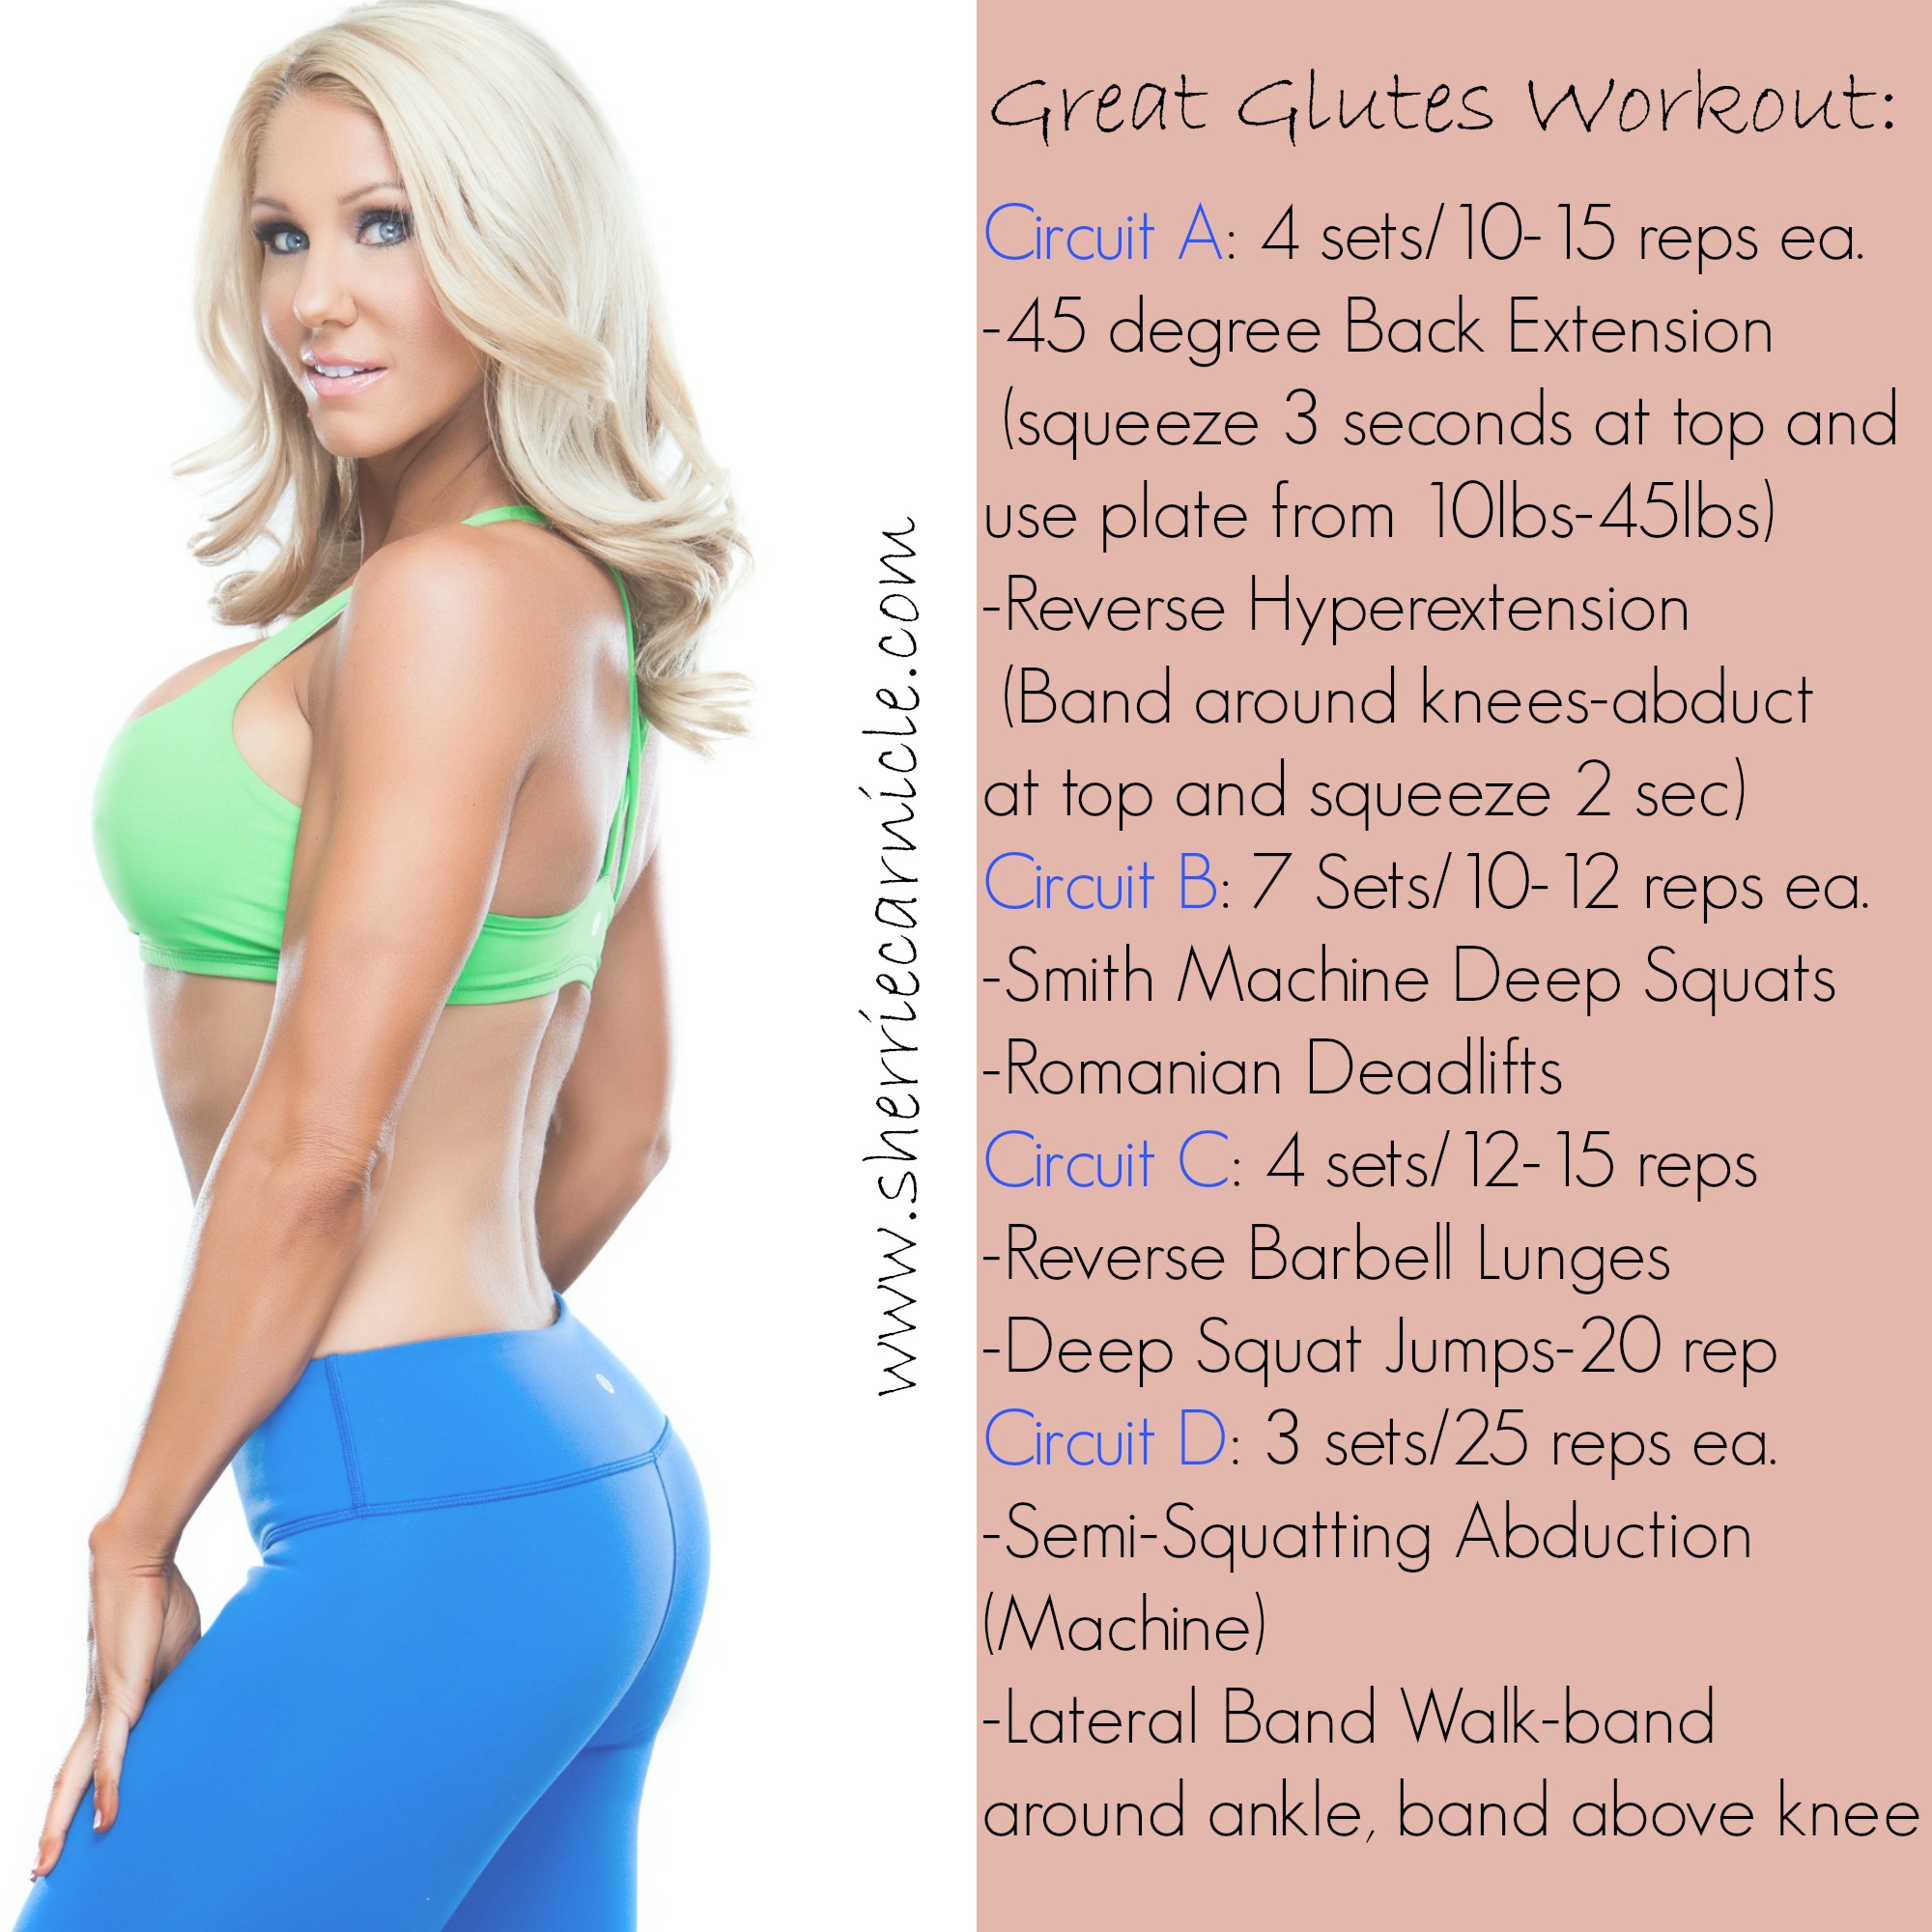 Great Glutes Workout